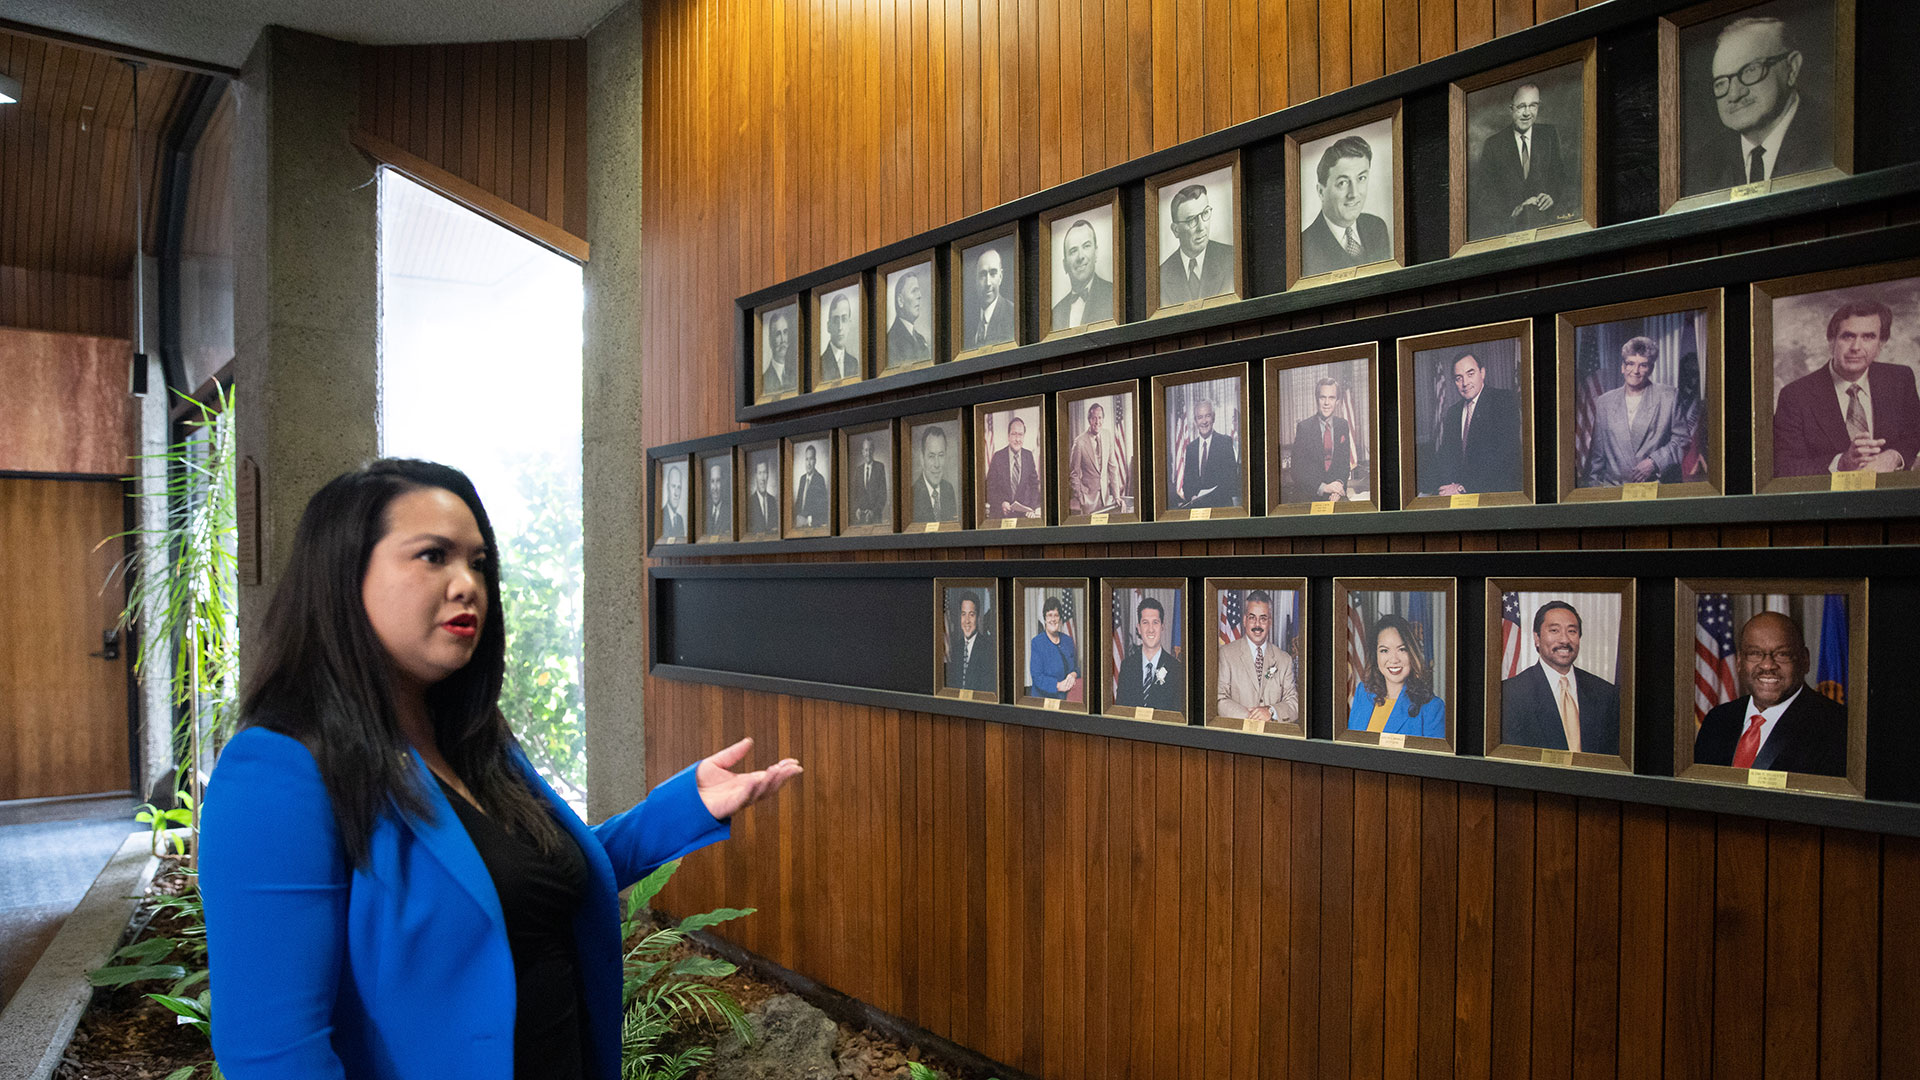 Daly City Mayor Juslyn Manalo points to a wall of past mayors on the wall of City Hall. For many years white men dominated, but more recently the city's diverse community is represented here too.